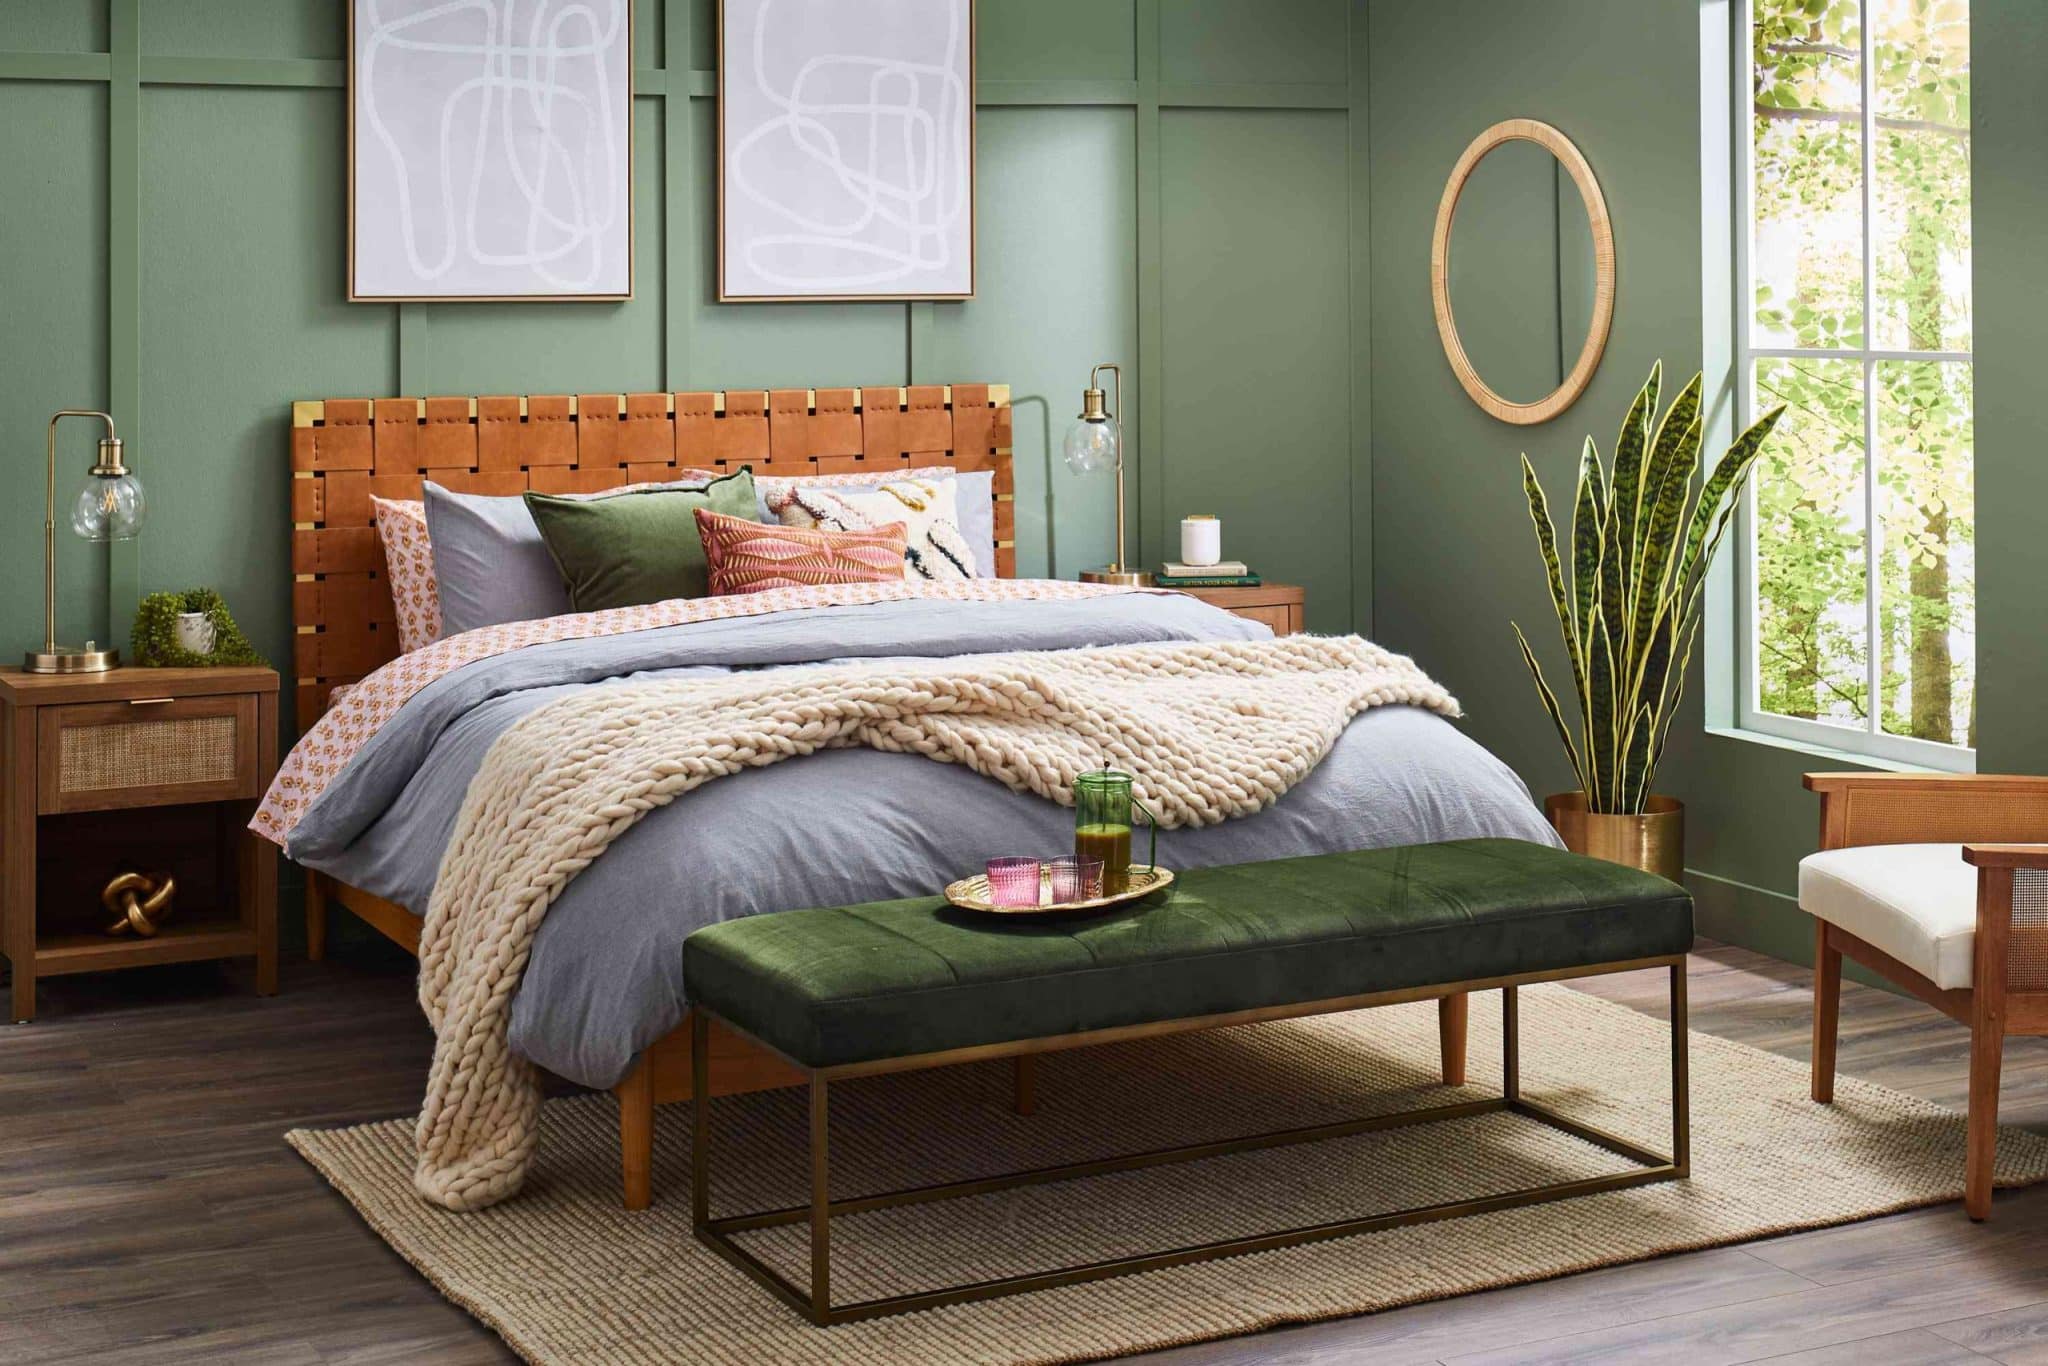 What Colors and Materials Are Typically Used in Scandinavian Bed Designs?